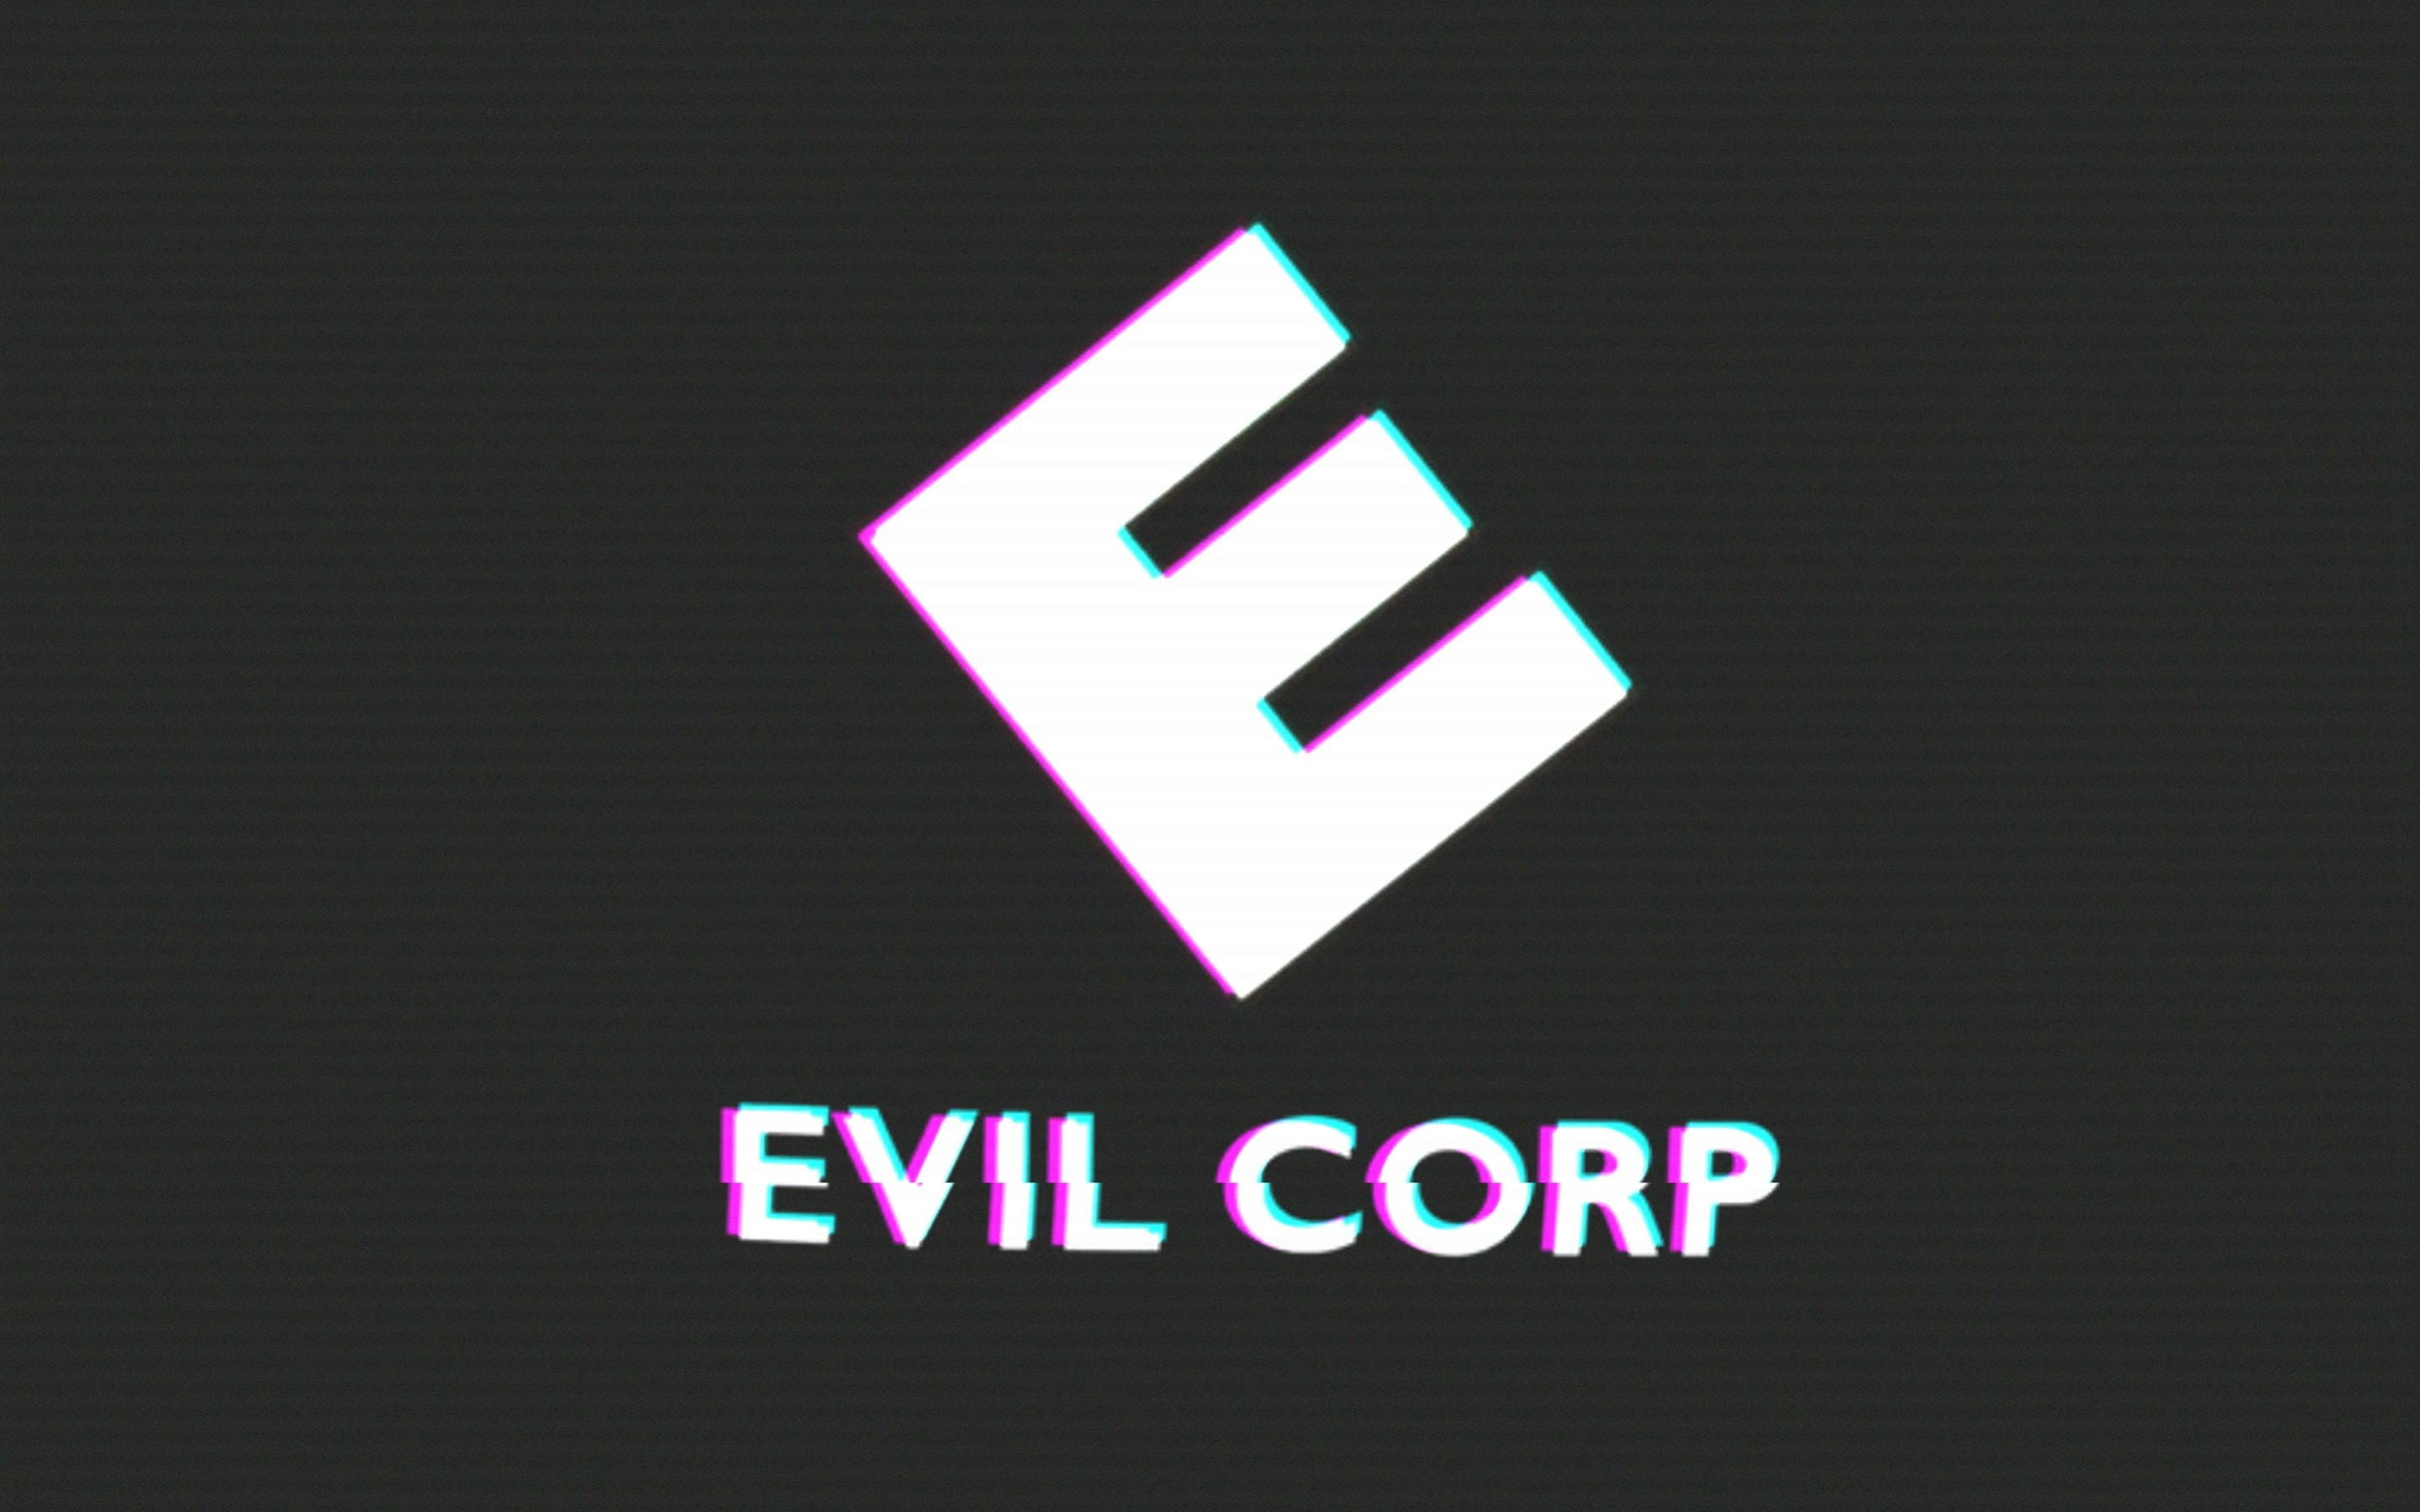 background with text overlay, Mr. Robot, TV, EVIL CORP